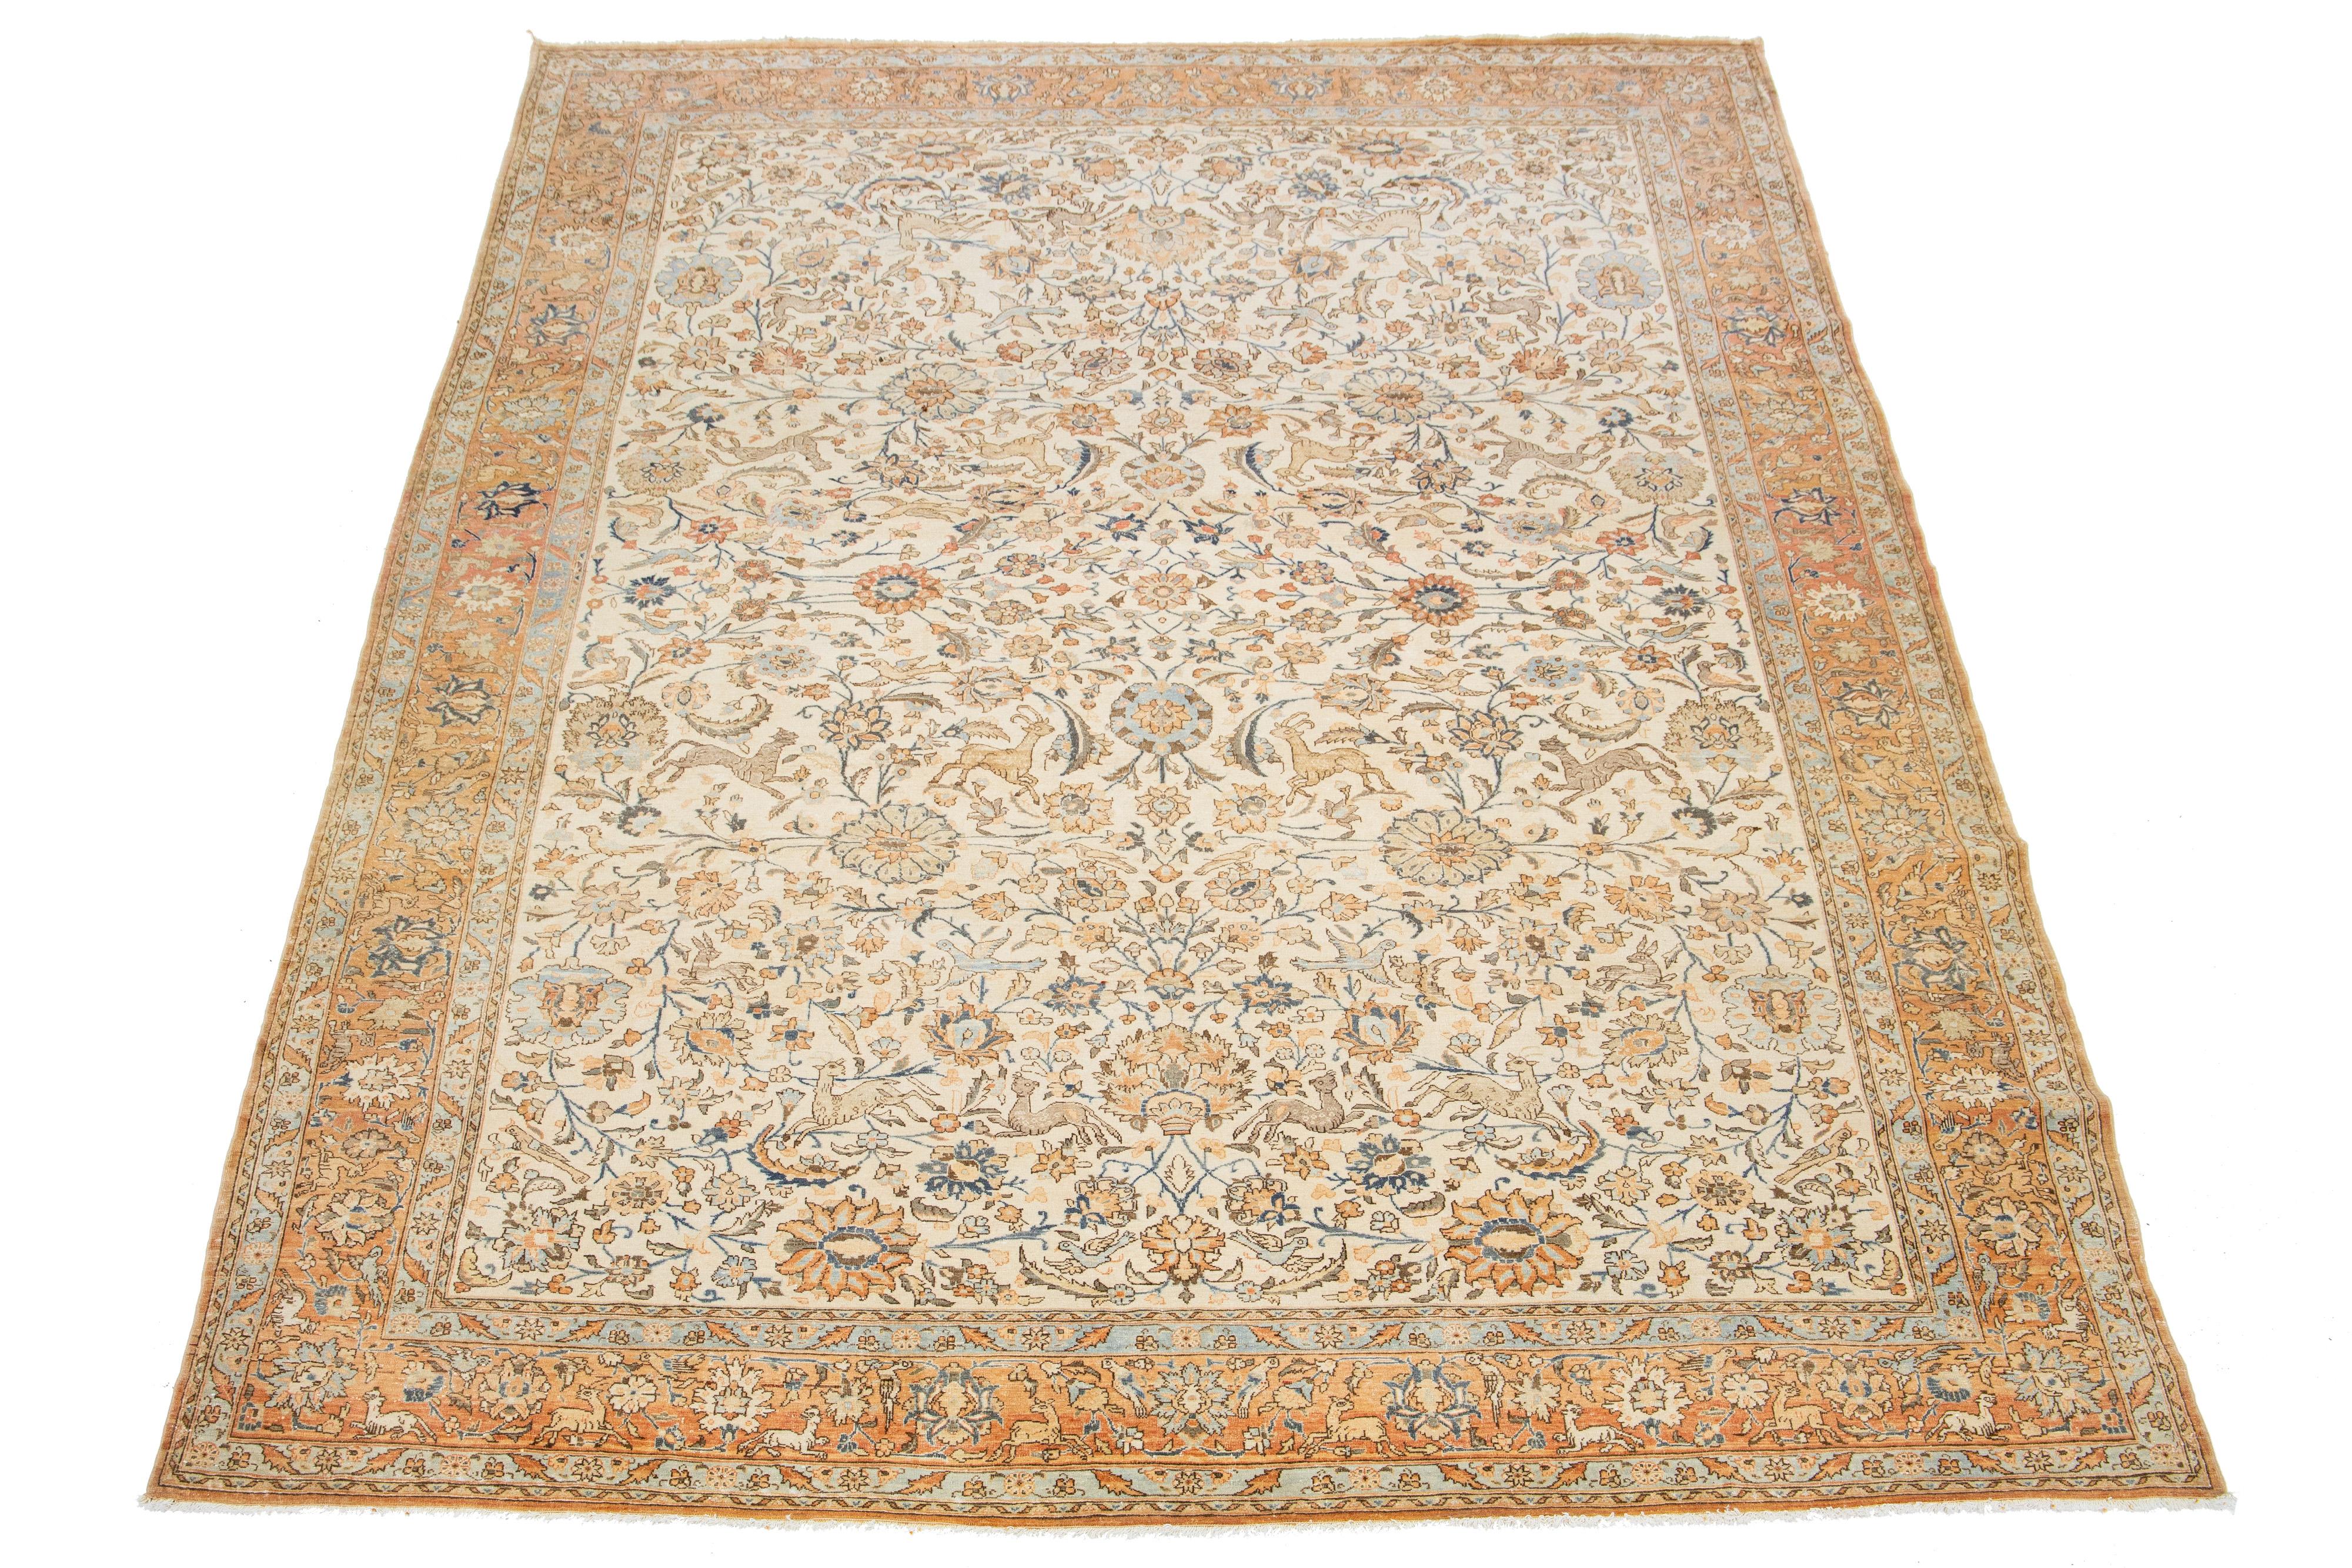 This Persian Tabriz wool rug, handcrafted, showcases a traditional floral pattern. The contrast between the beige backdrop emphasizes the orange and blue floral design.

This rug measures 8'9